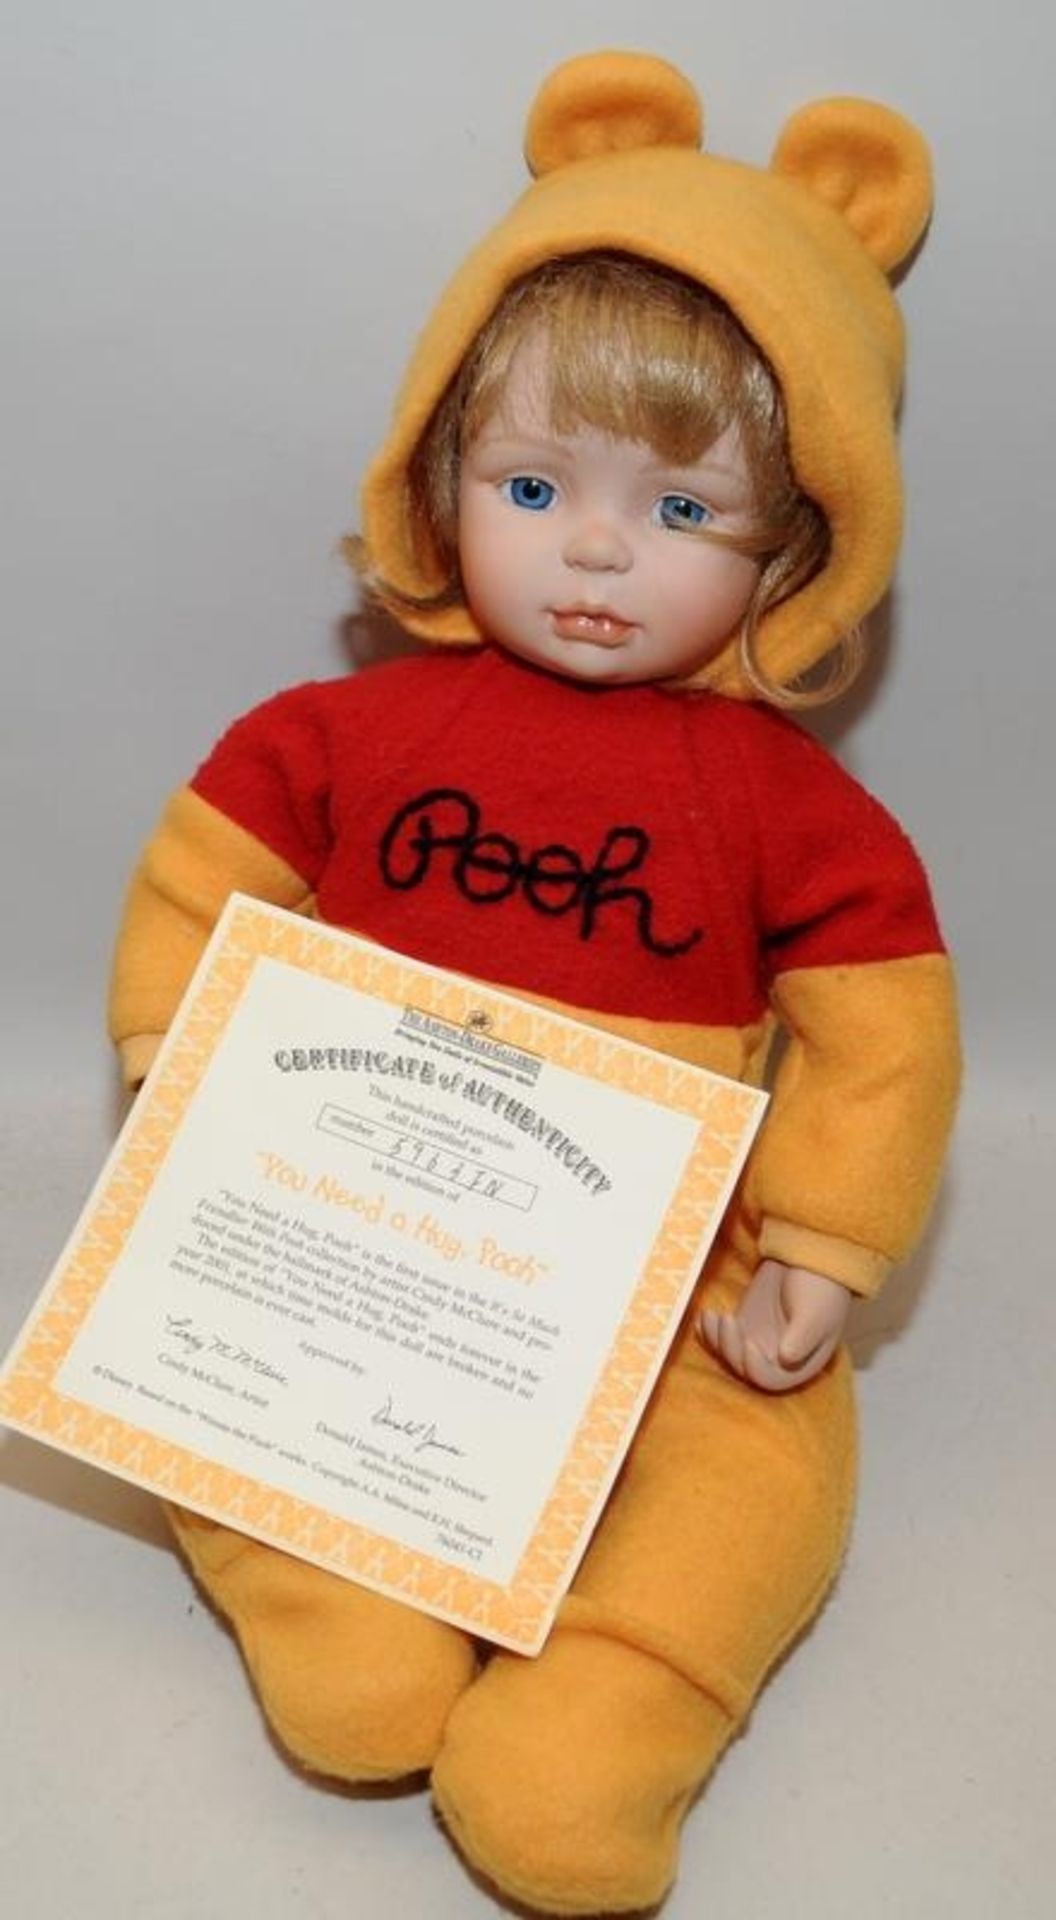 4 x Ashton Drake Winnie The Pooh themed dolls: What's For Lunch?, Let's Play Patty-Cake, It's Time - Image 4 of 5